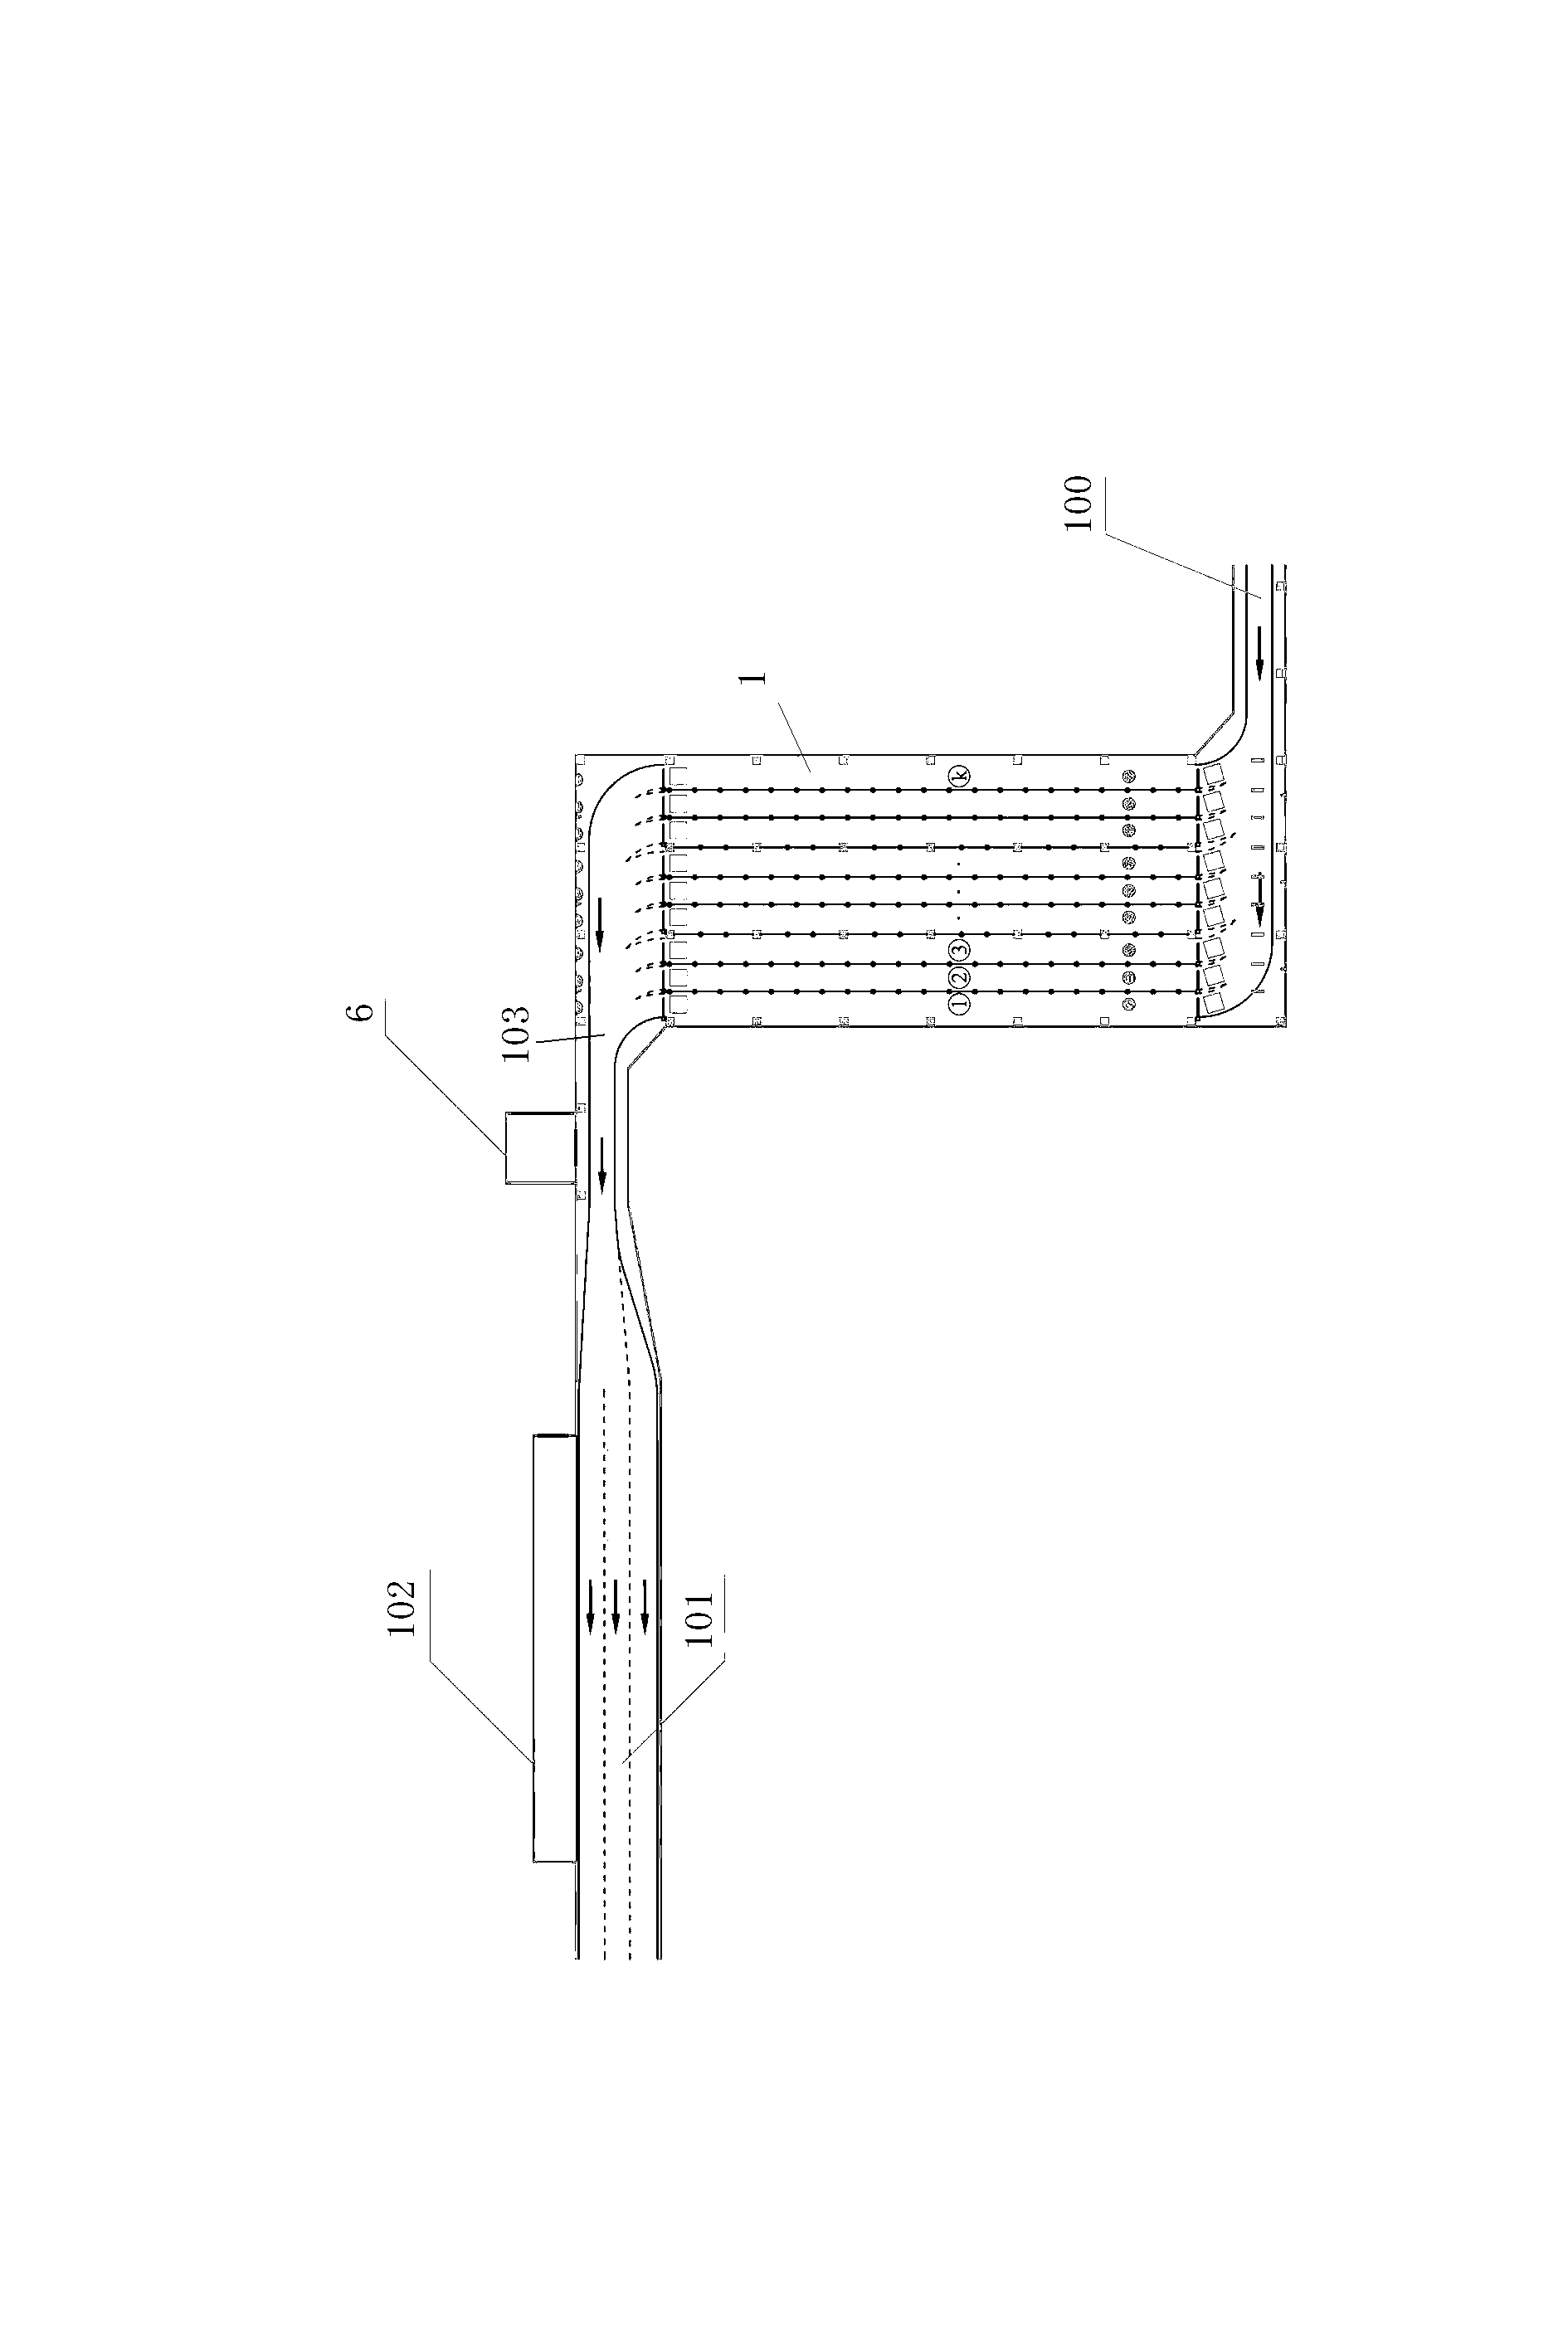 Large-scale taxi storage yard control system and control method thereof